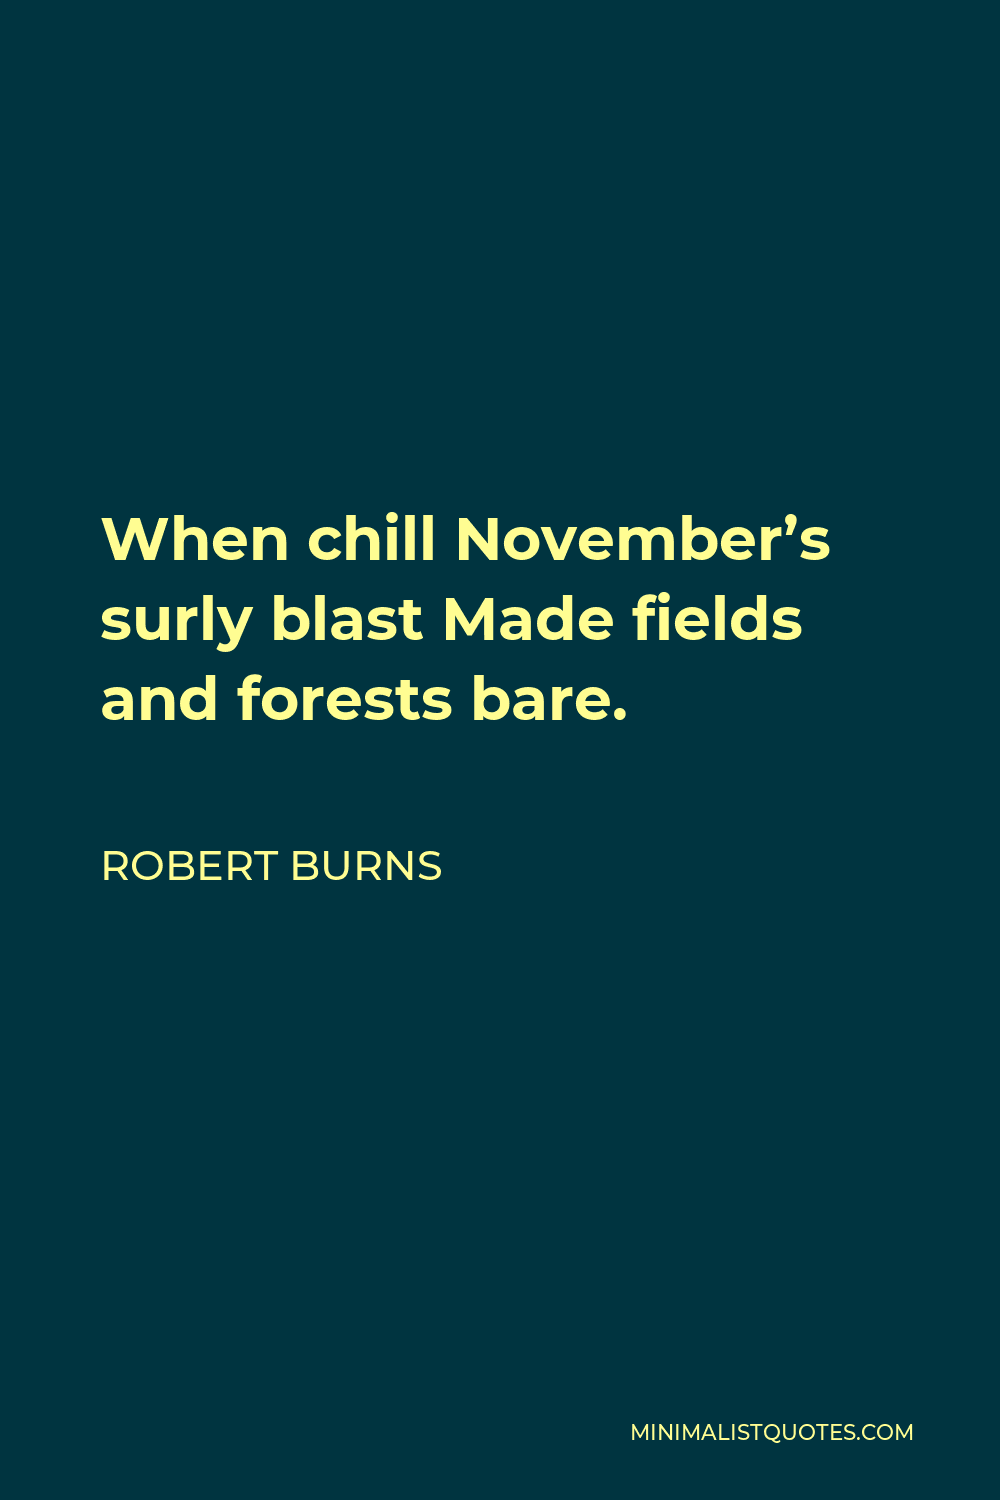 Robert Burns Quote - When chill November’s surly blast Made fields and forests bare.